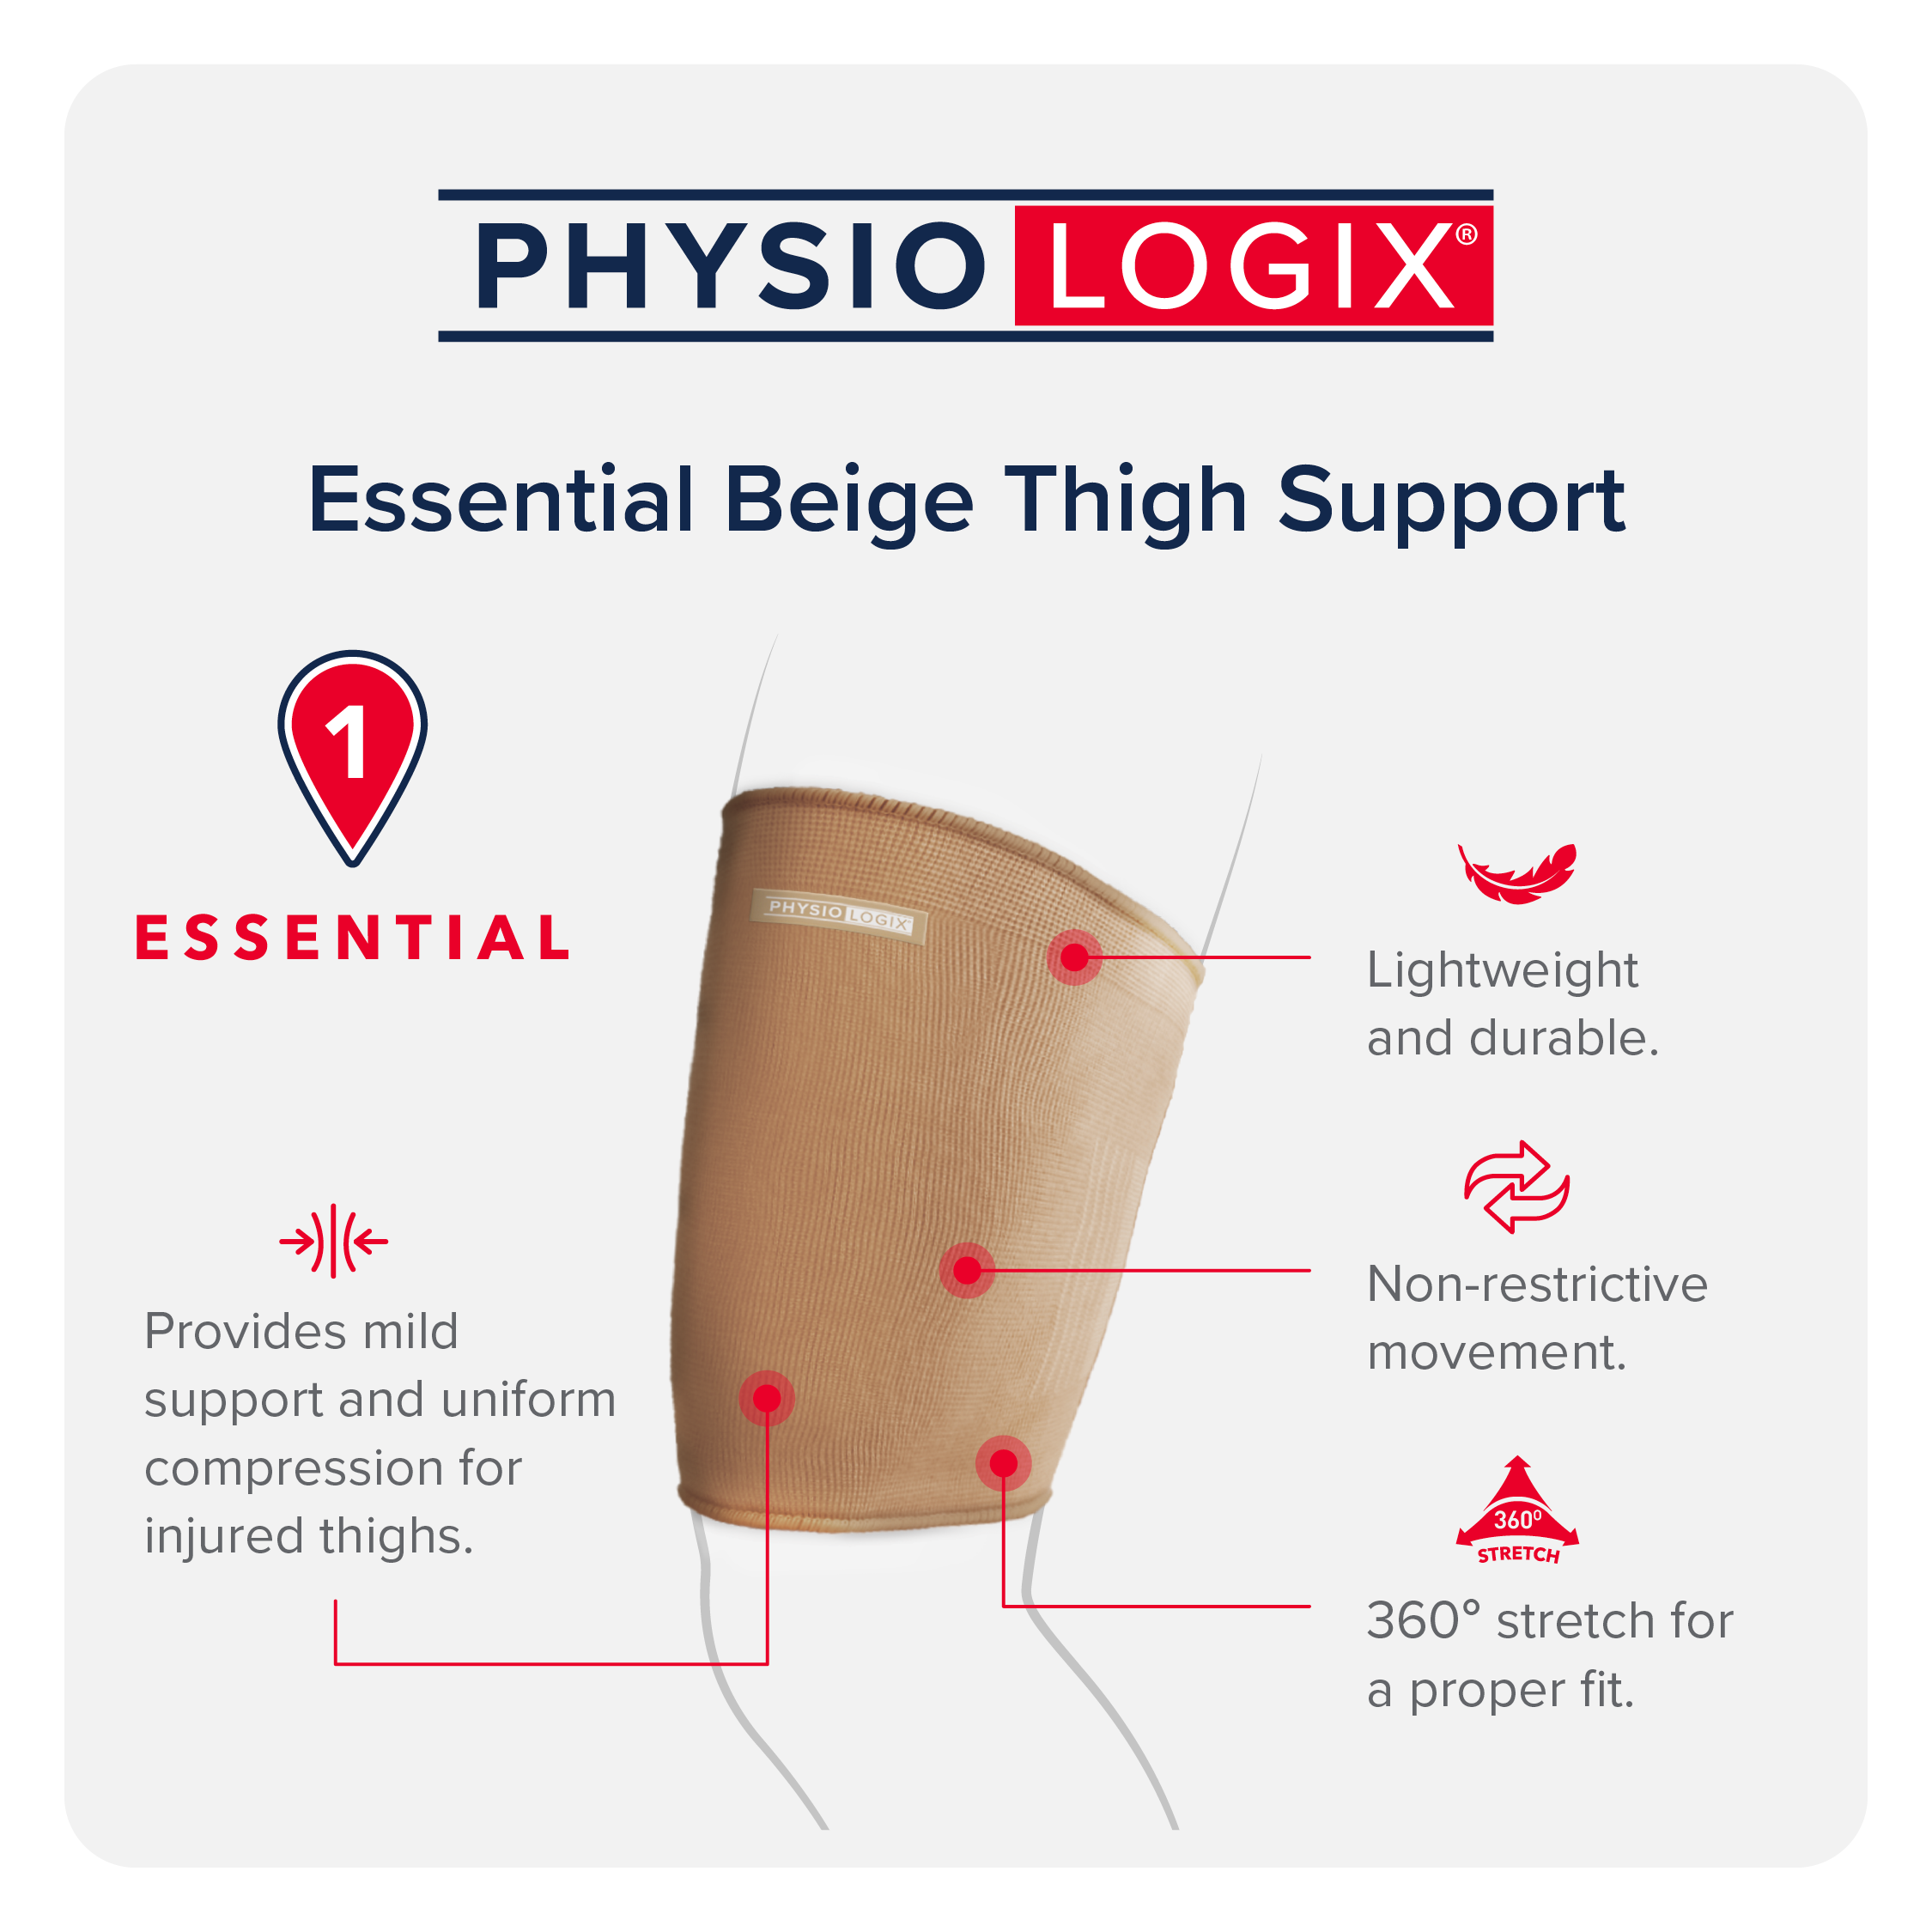 Physiologix Essential Beige Thigh Support Features